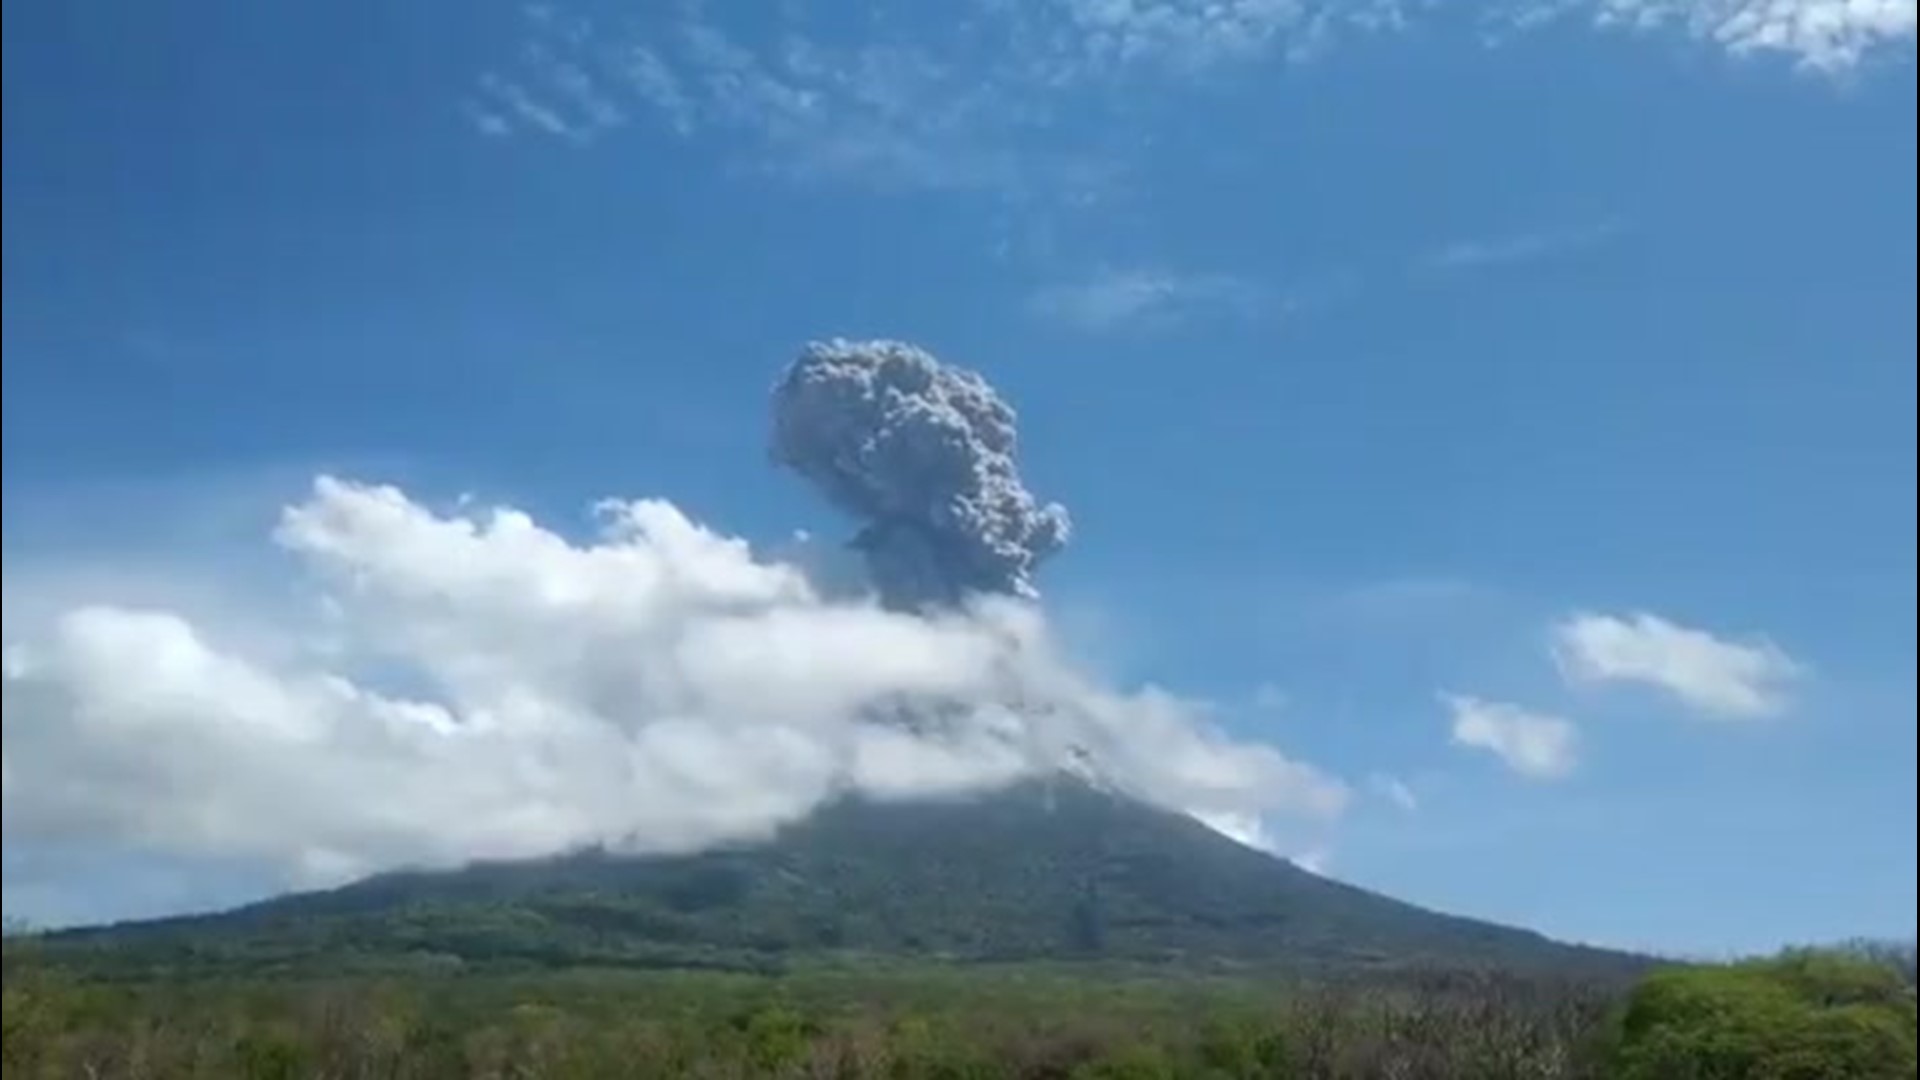 Indonesia's Lewotolo volcano spewed ash and debris thousands of feet into the sky as it erupted on Nov. 29.